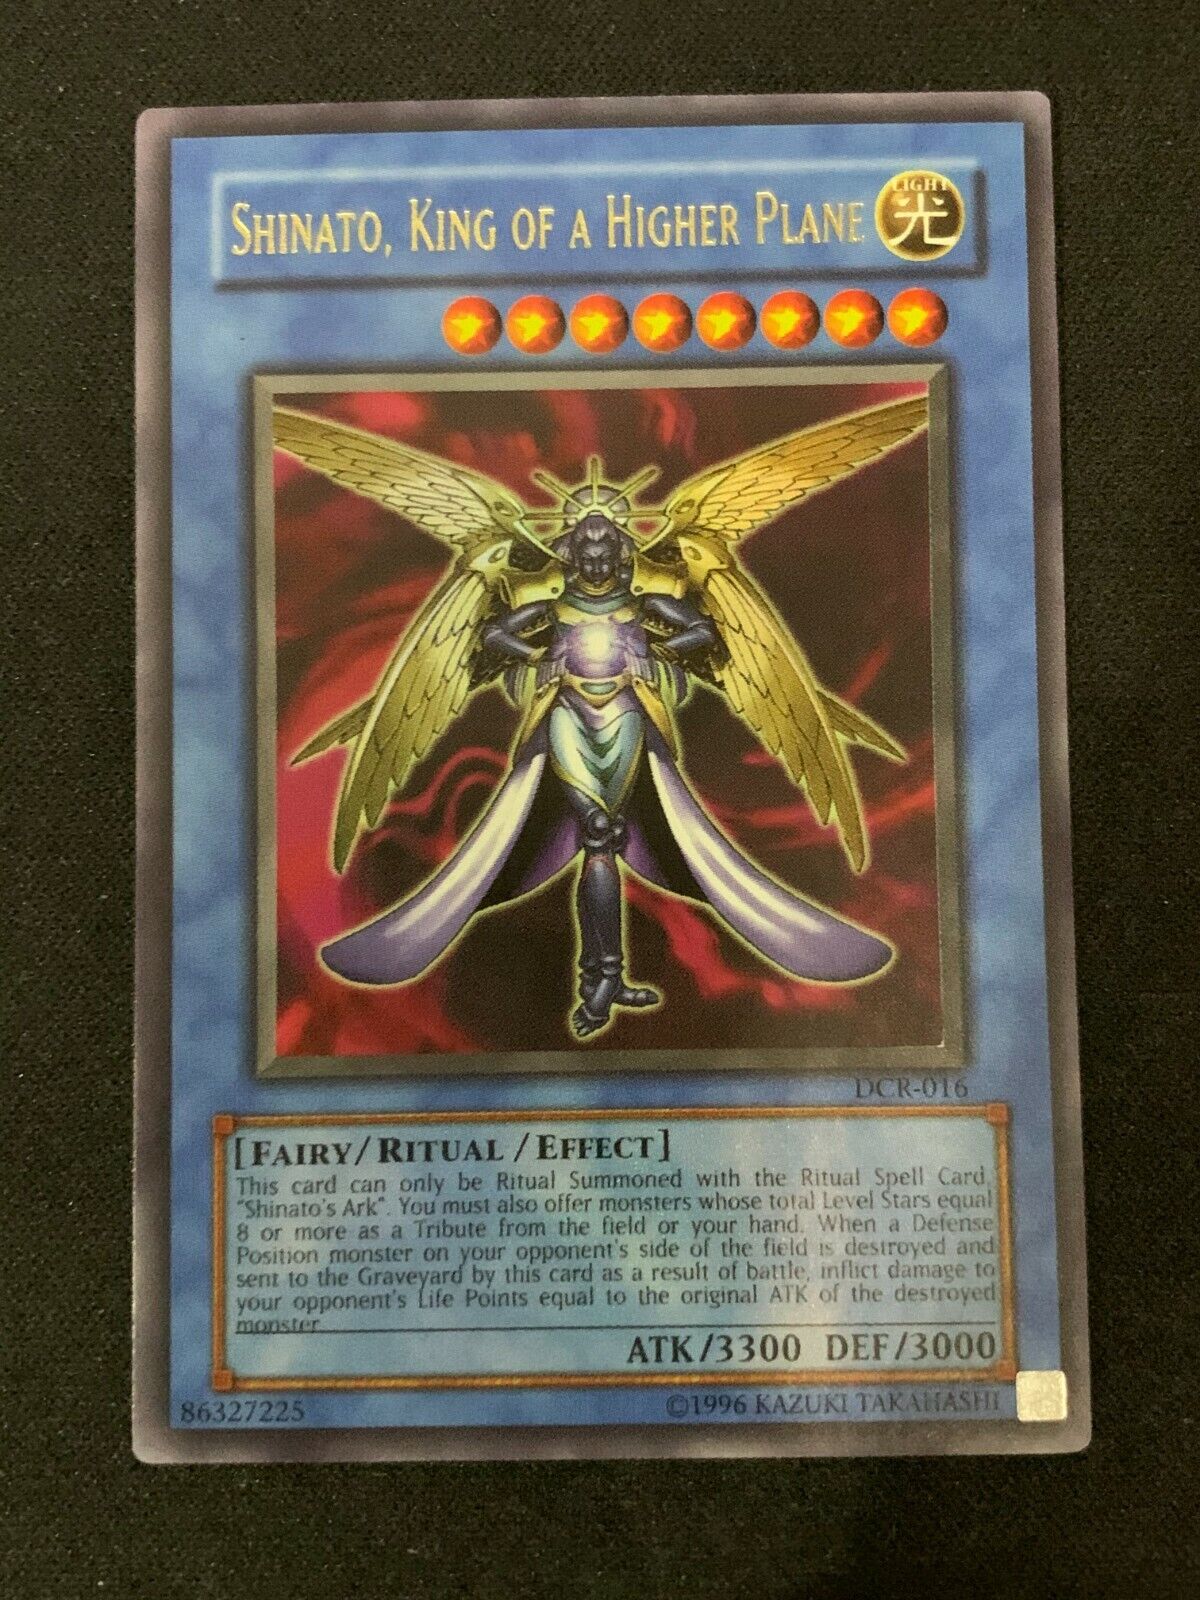 YuGiOh Shinato, King of a Higher Plane Ultra Rare DCR-016 Unlimited NM